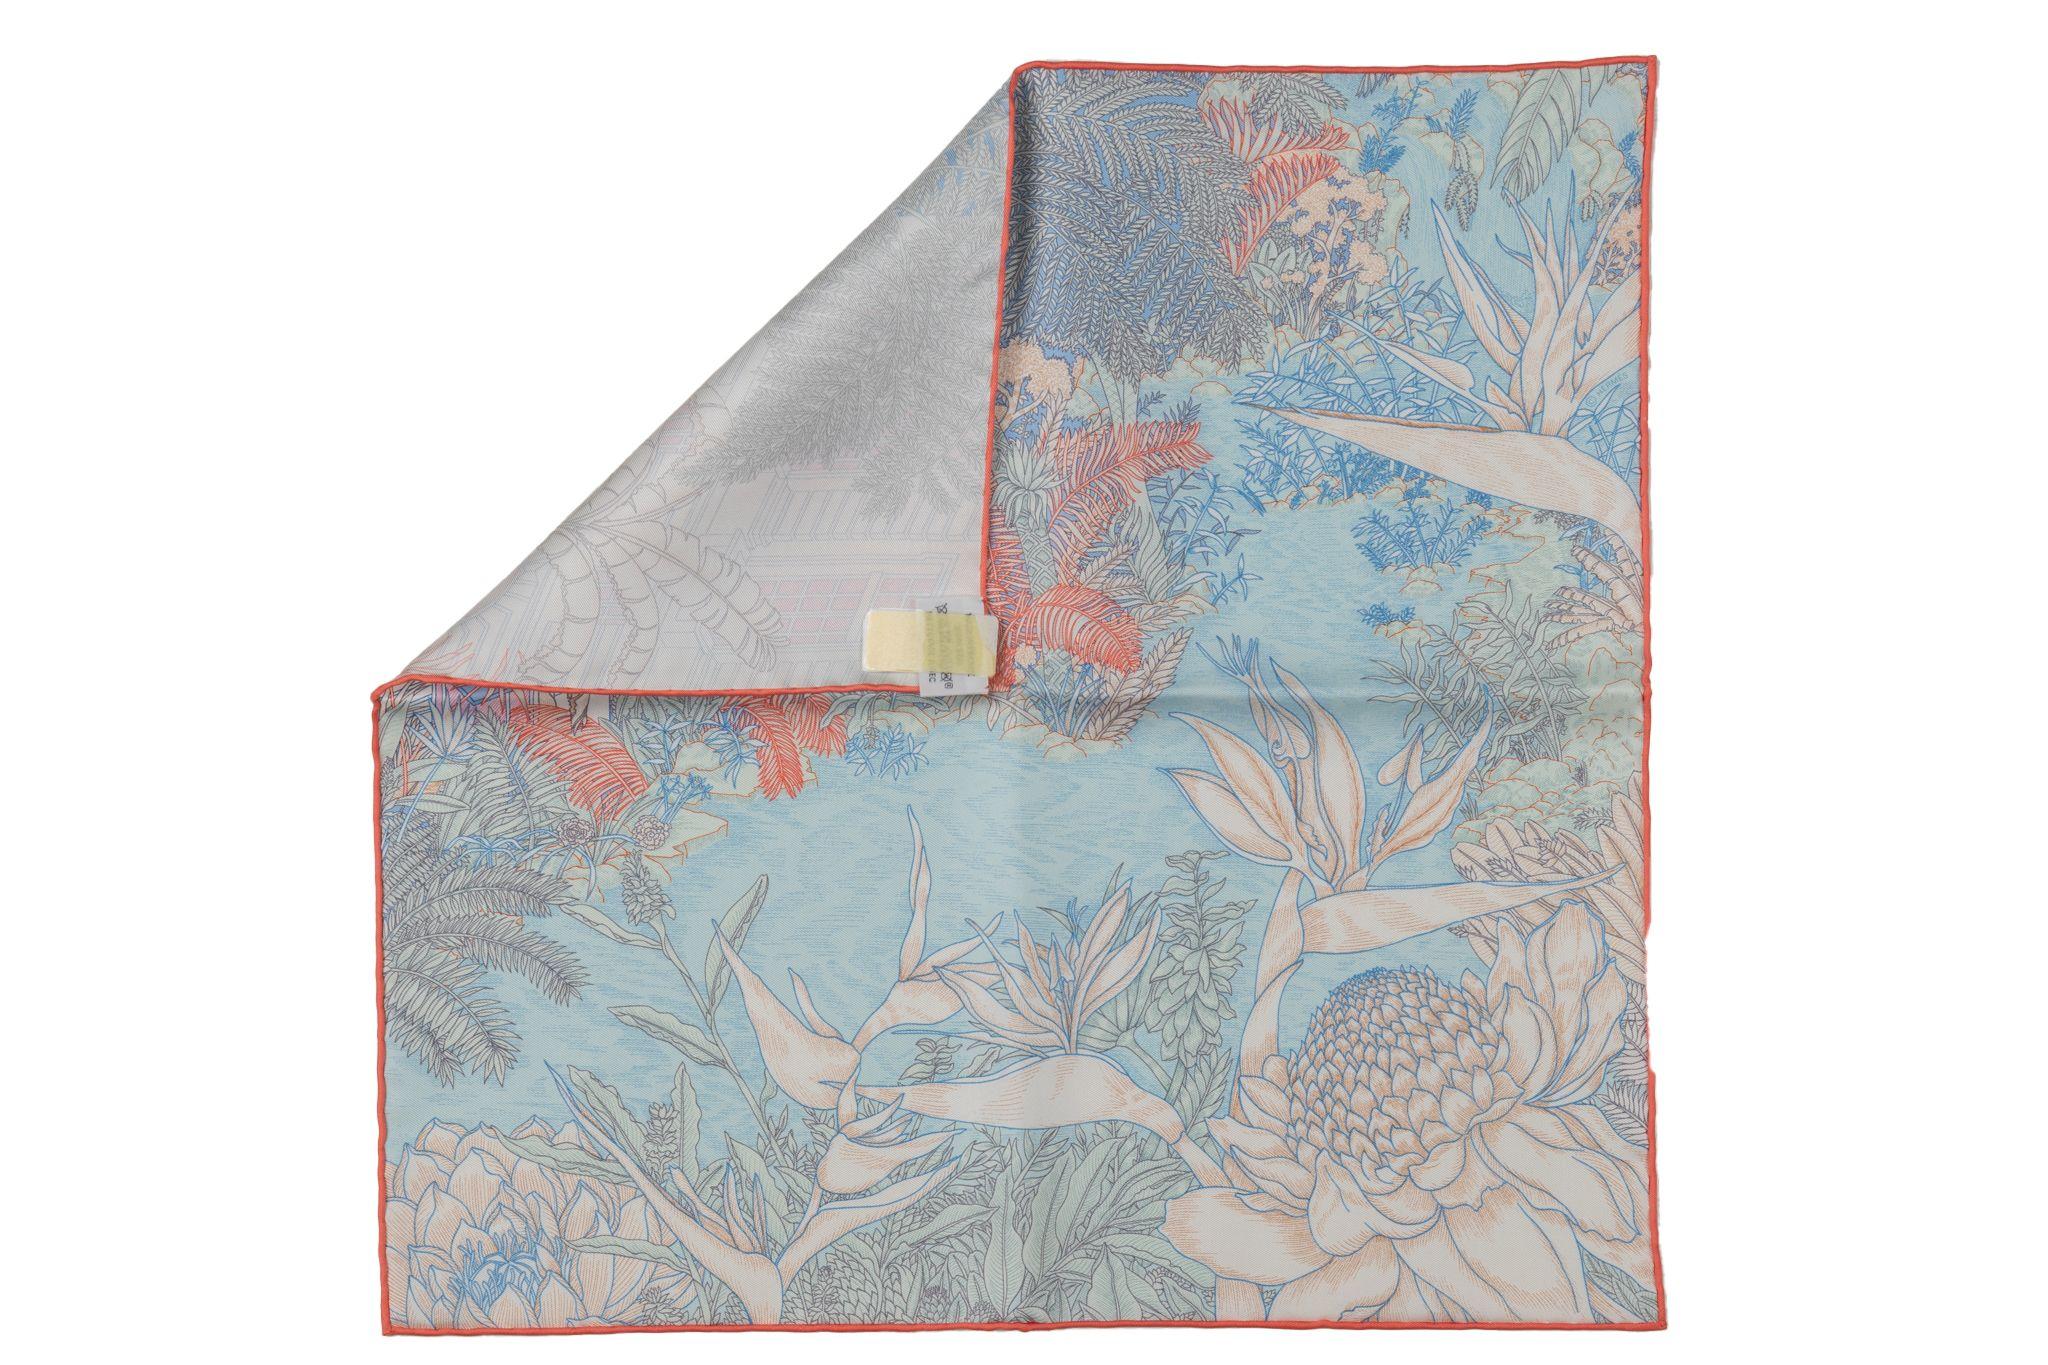 Hermès brand new in box tropical garden grey and blue silk gavroche. Hand-rolled edges.  Comes with original box.